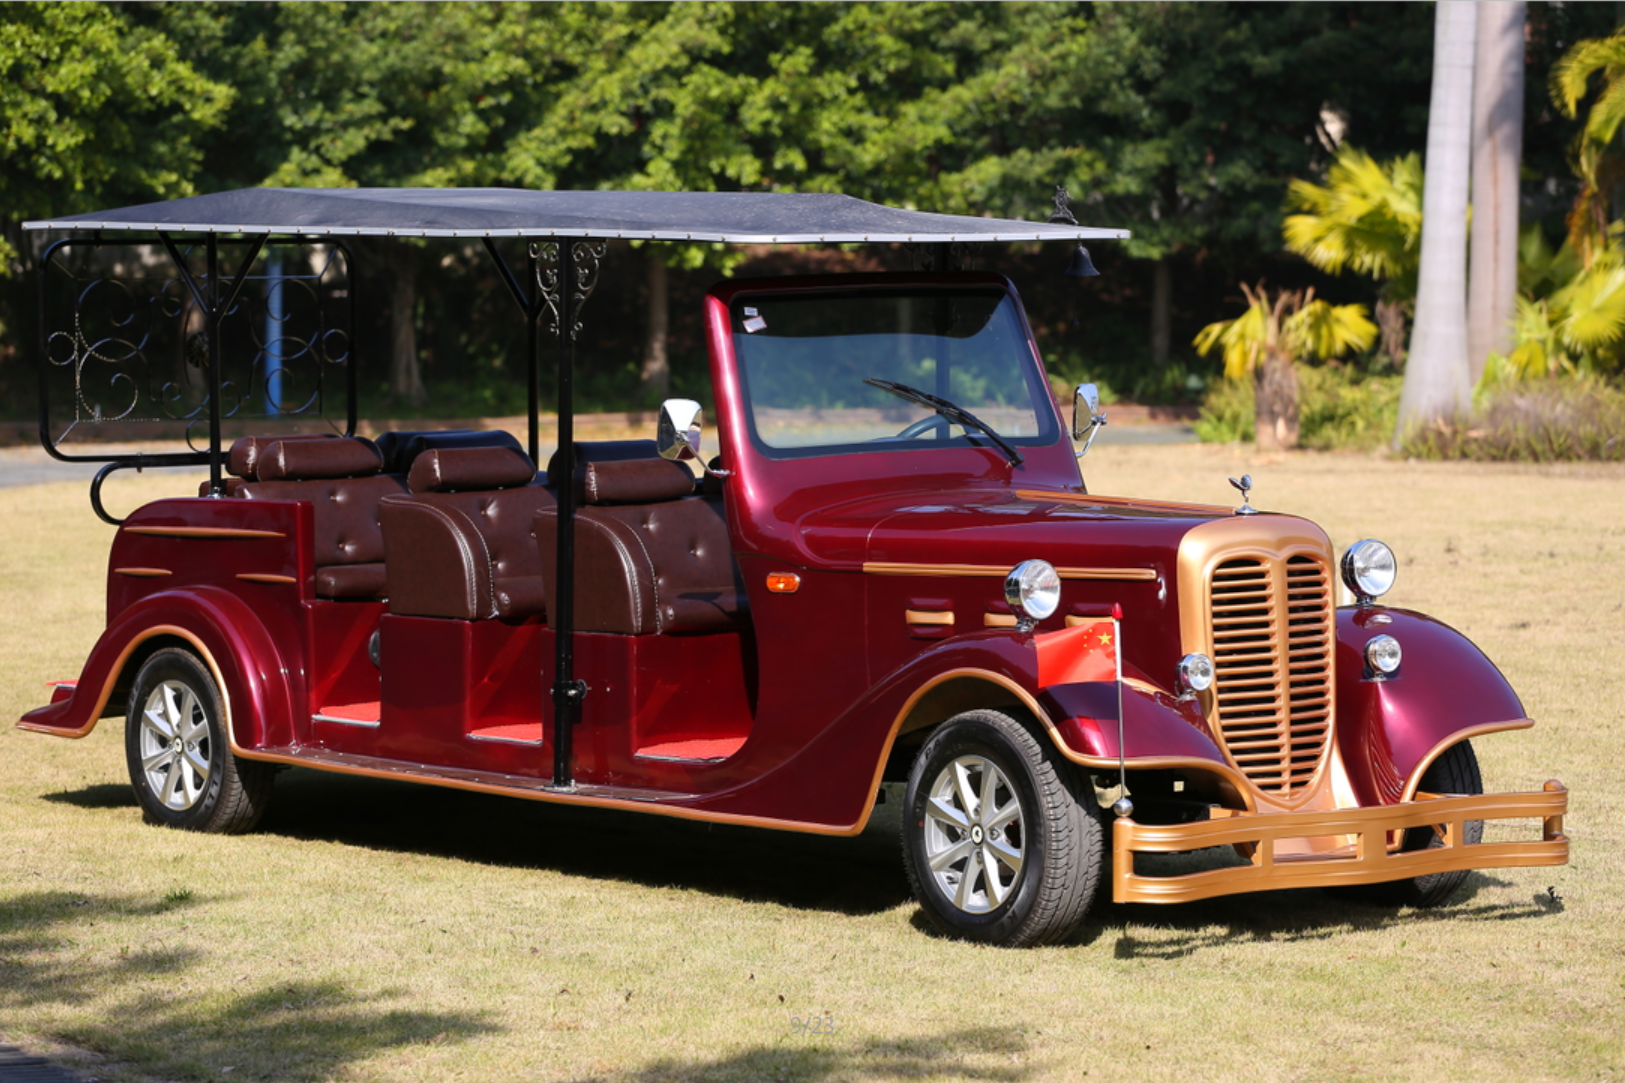 leisure vehicles, leisure carts, classic cars, antique car, classic resort cars, electric antique cars, low speed classic cars, shuttle vehicle, recreational vehicle, recreational car, classic car from China, high quality classic cars, electric classic cars for resort, cheap classic cars for resorts, low speed vehicle, electric shuttle vehicle, ECARMAS